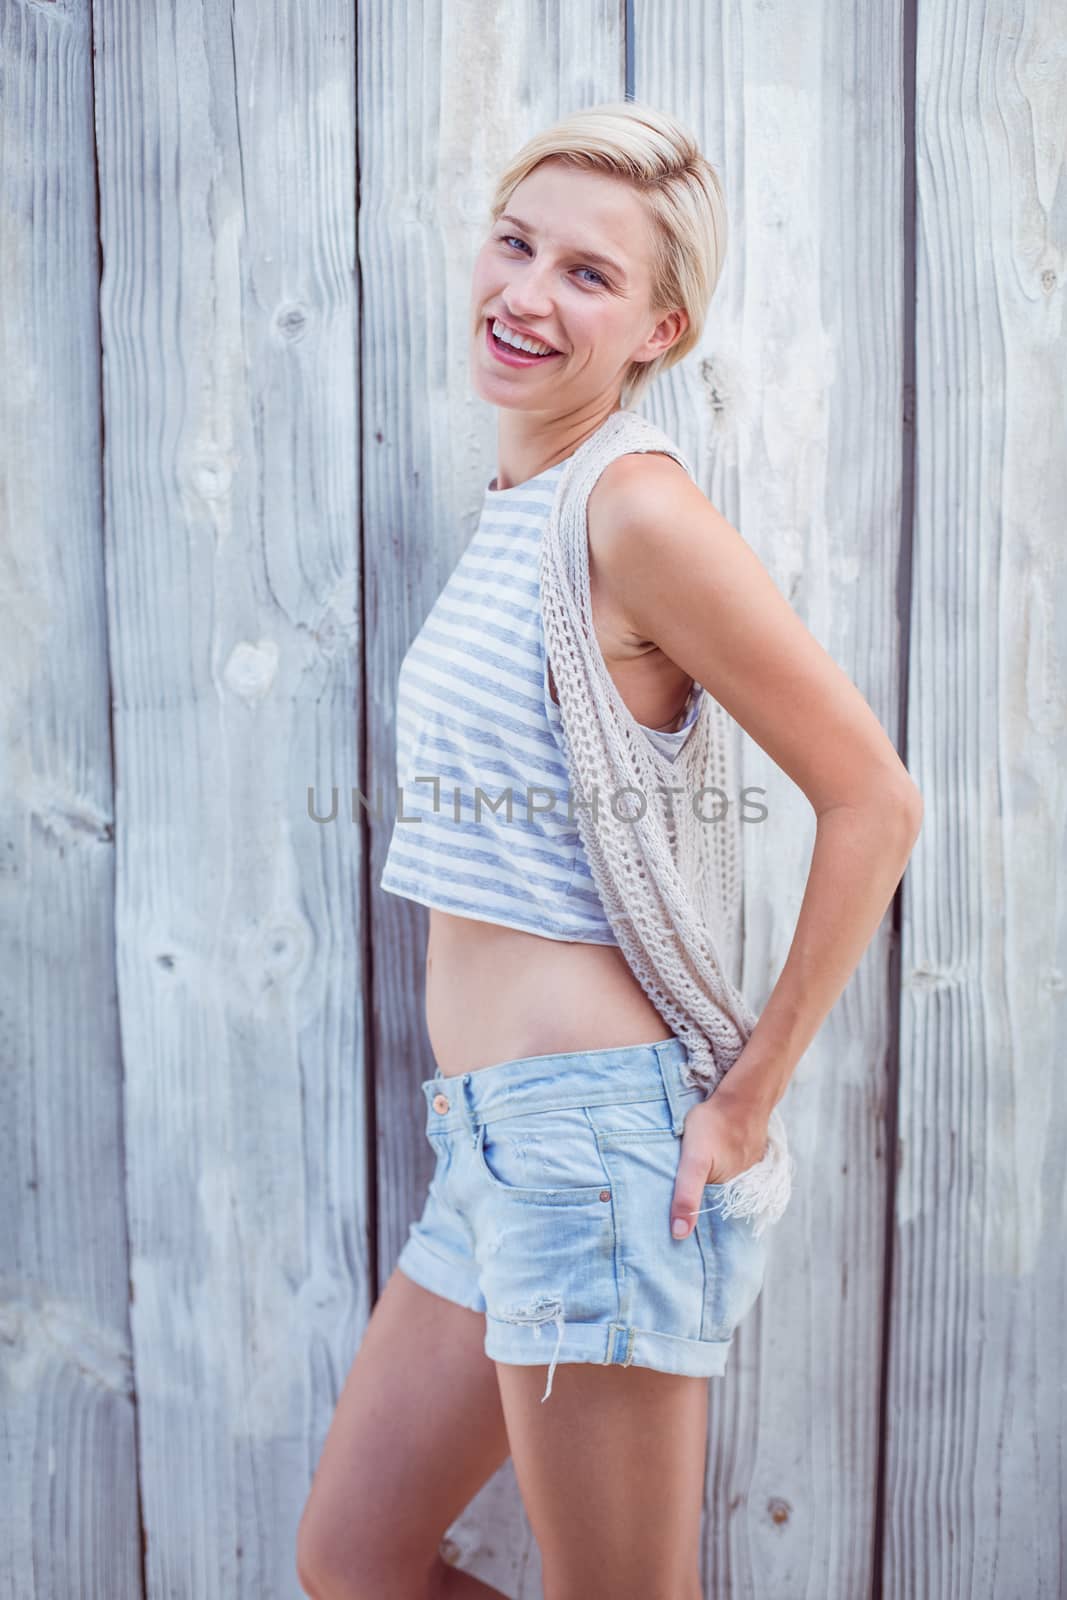 Pretty blonde woman smiling at the camera on wooden background